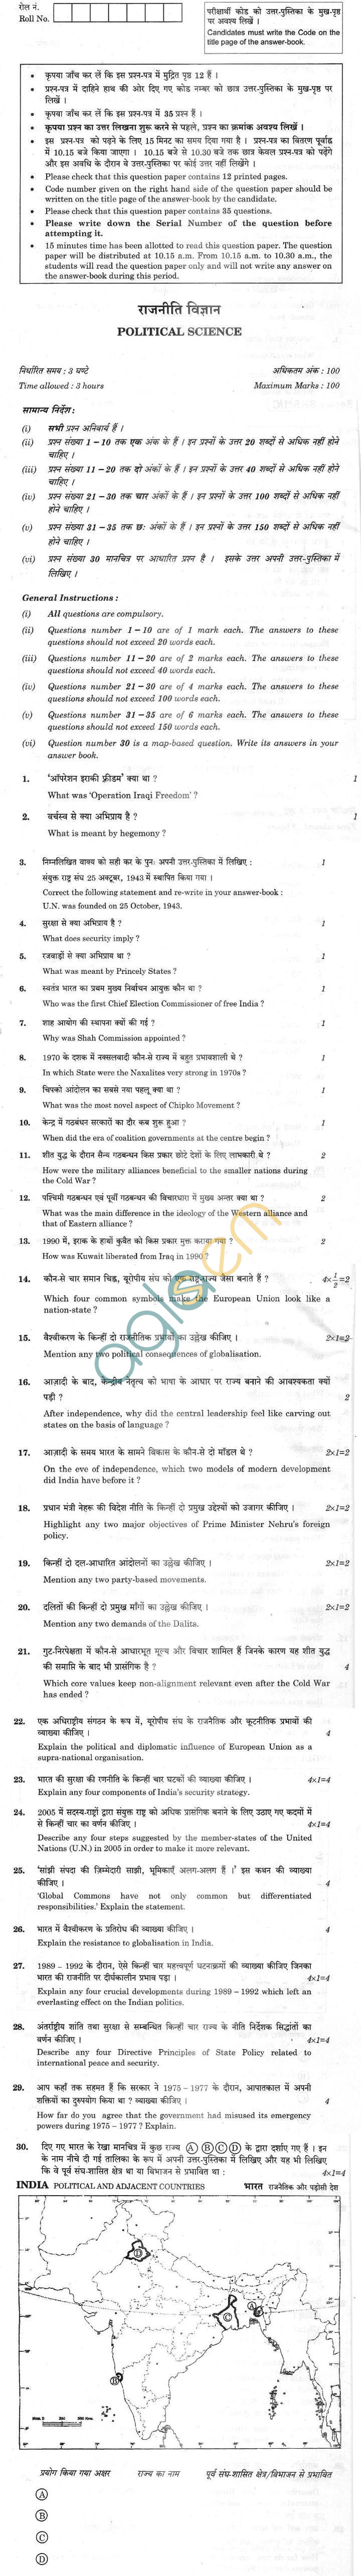 CBSE Compartment Exam 2013 Class XII Question Paper - Political Science